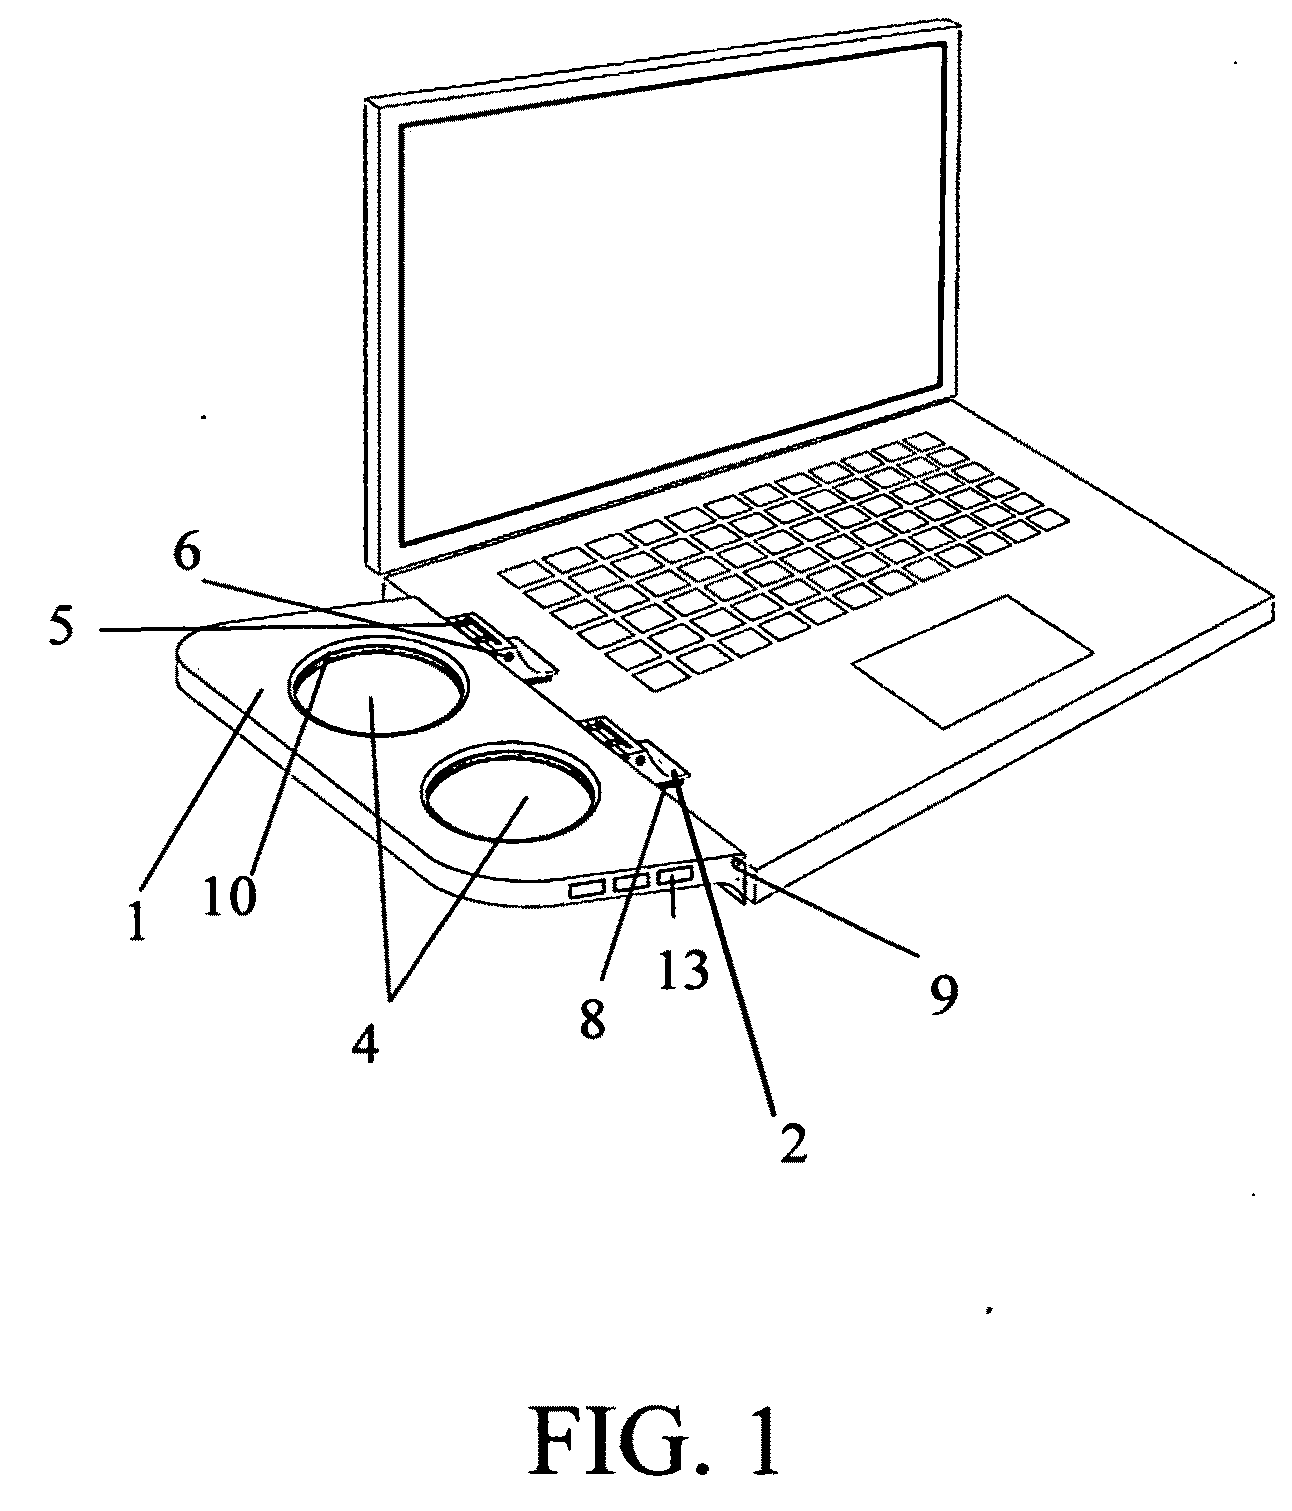 Multifunction portable table attachment for laptop computers